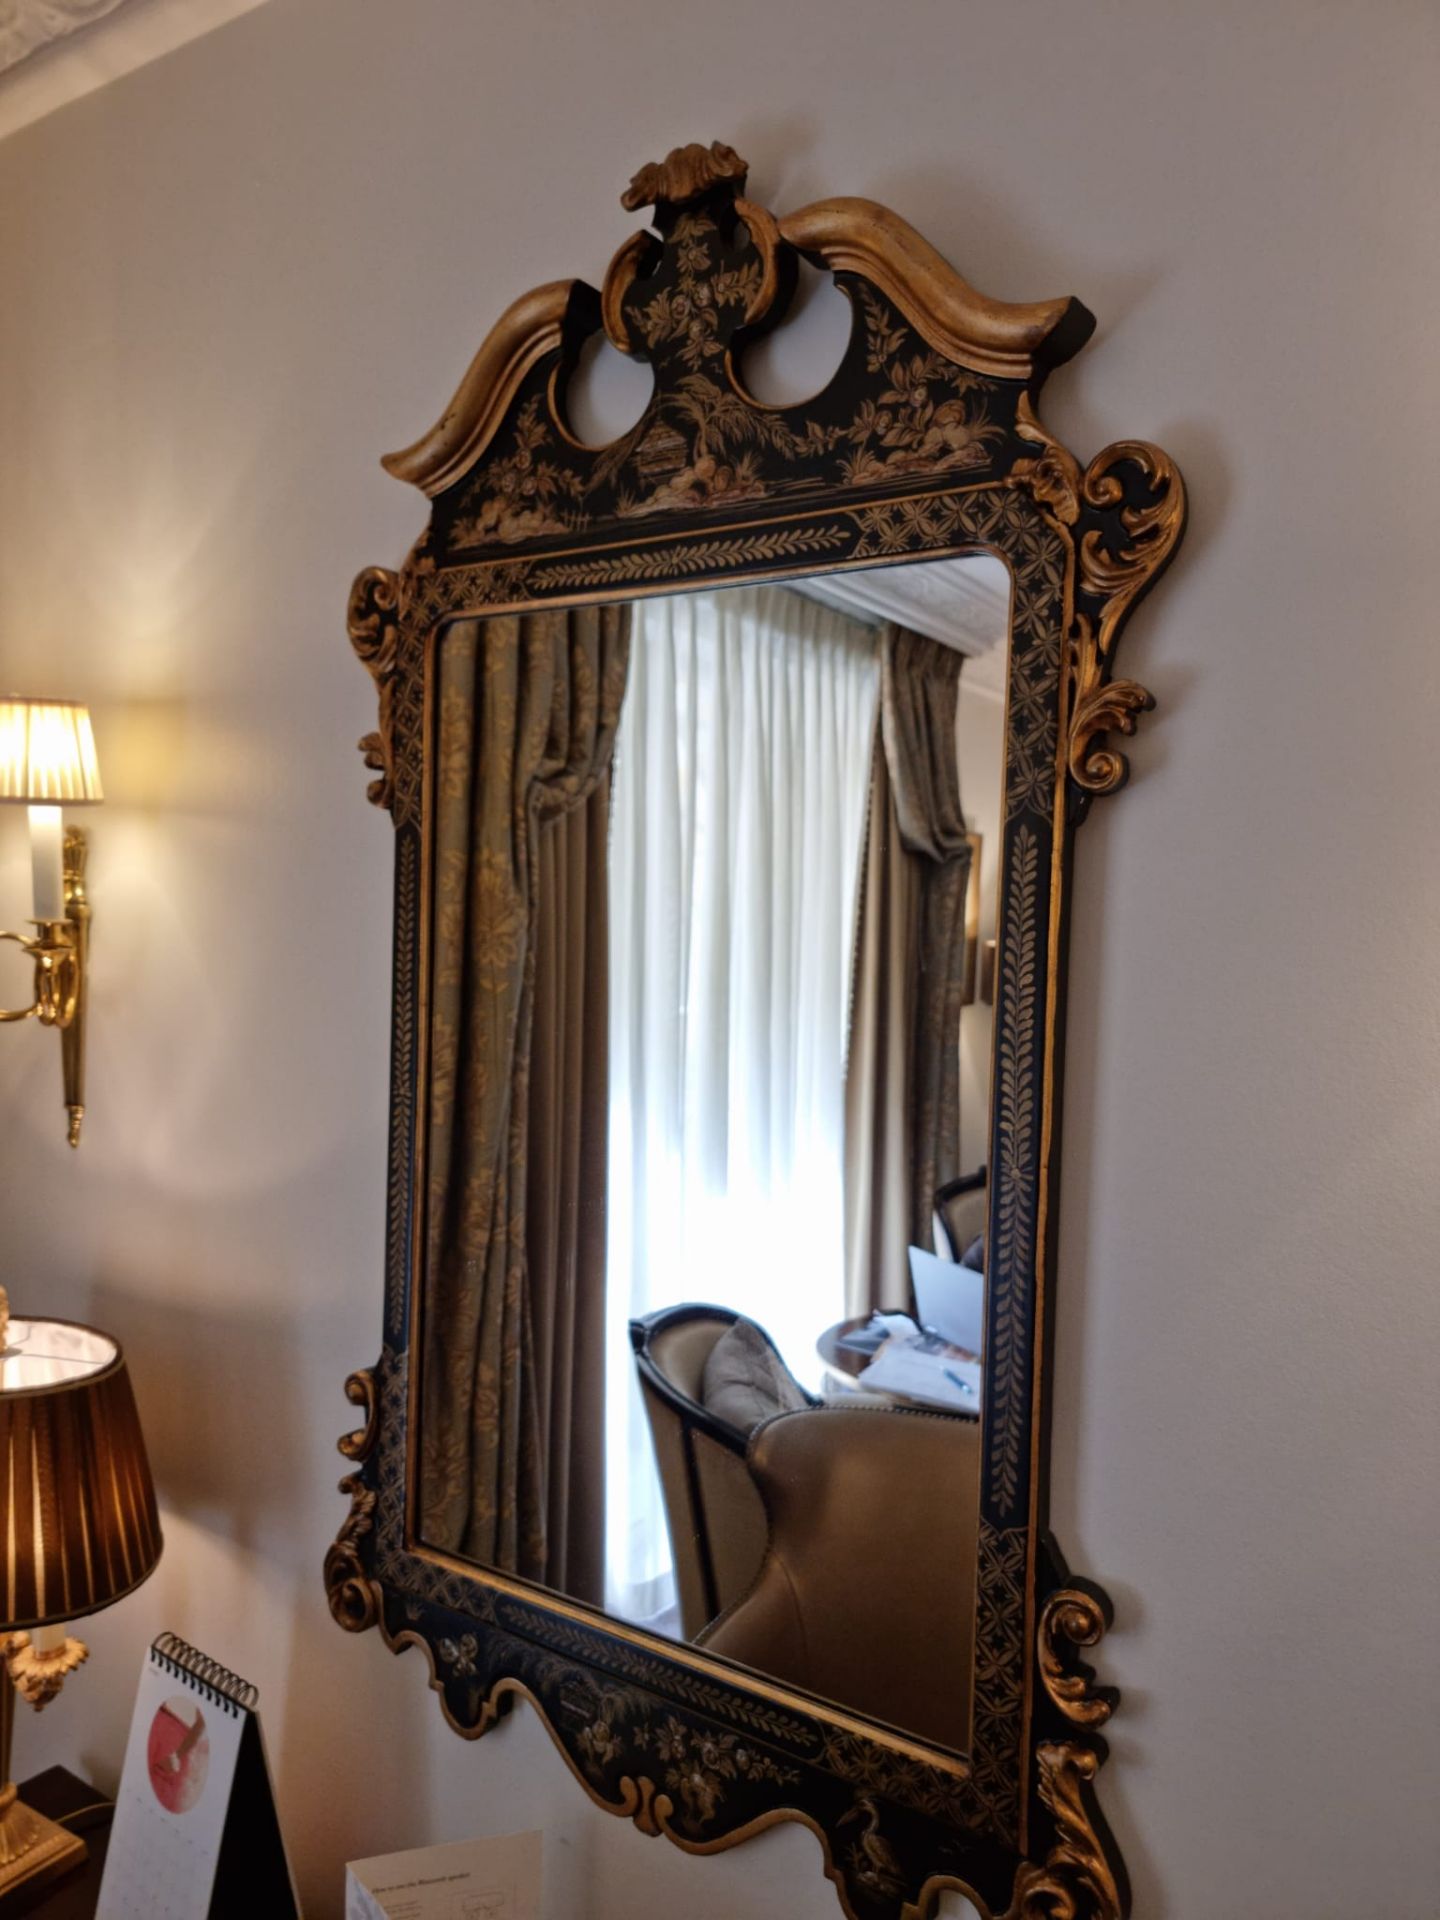 Black Lacquered And Gilt Accent Mirror With Cartouche Pediment 72 x 120cm (Room 105